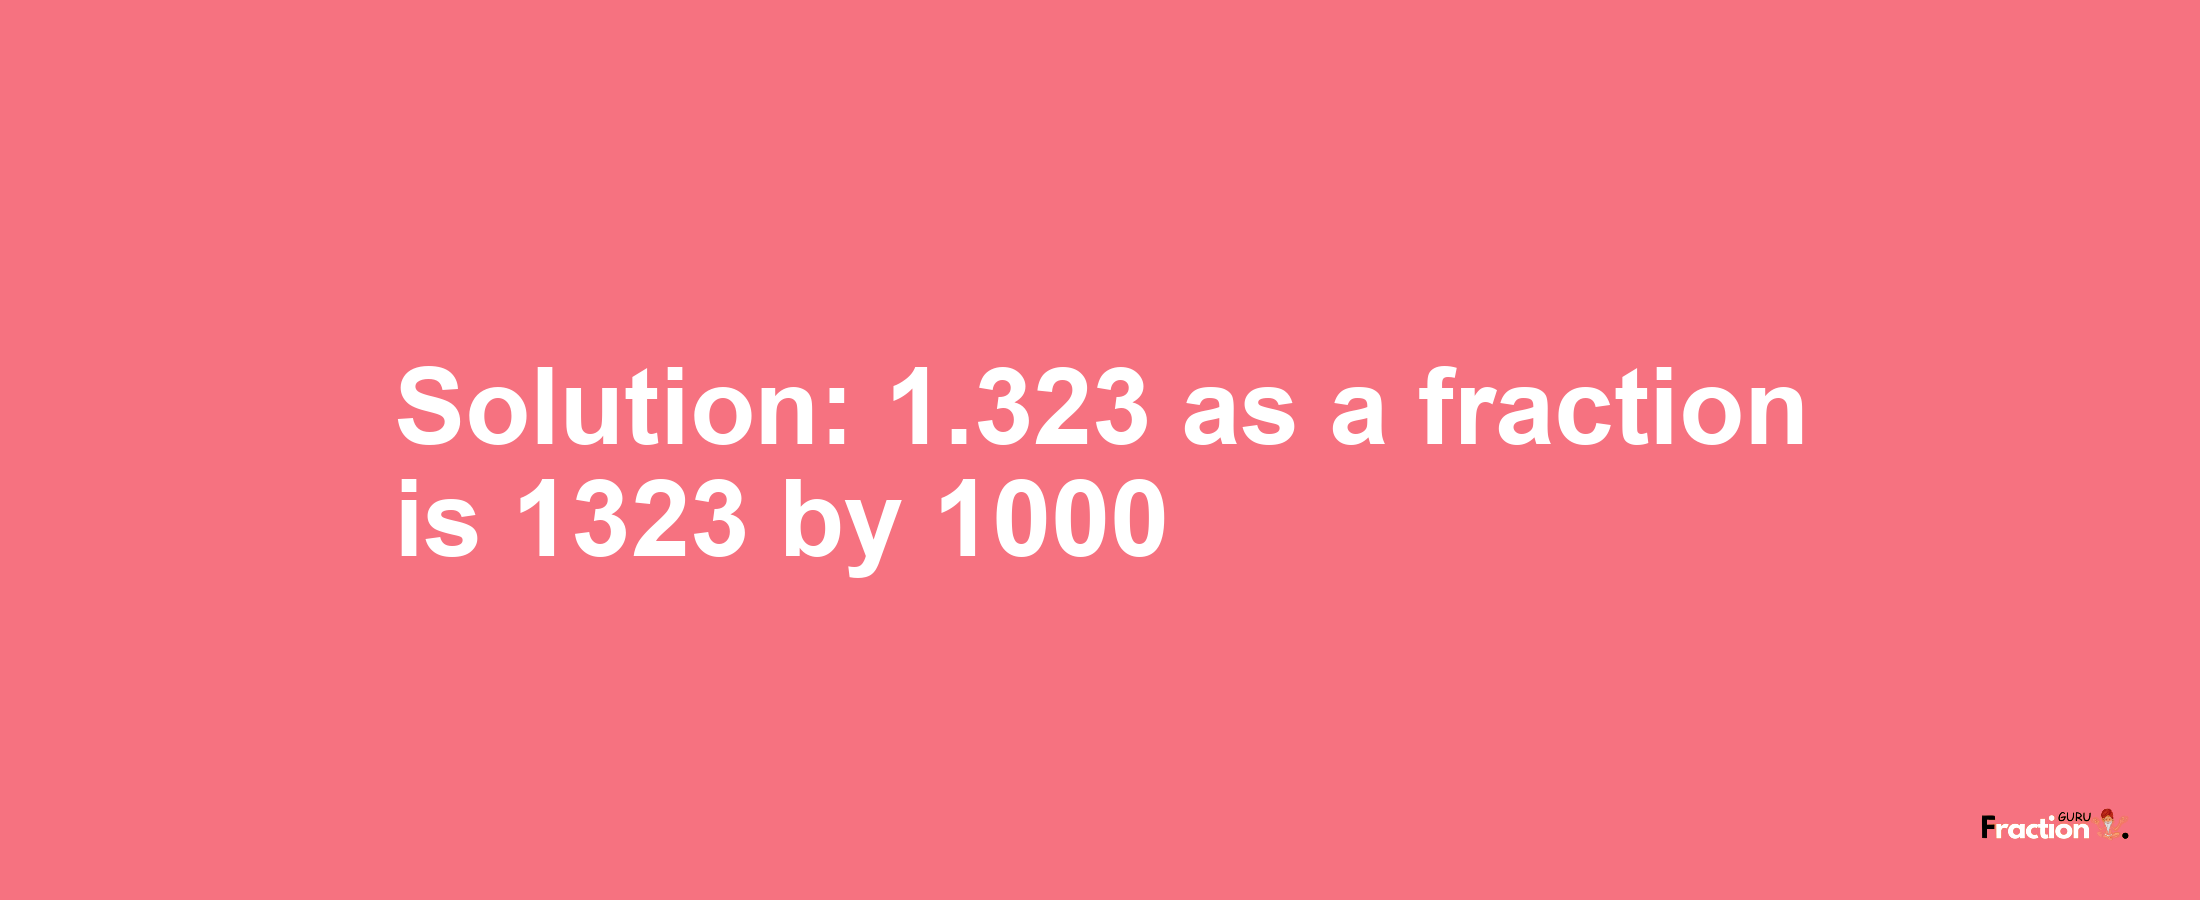 Solution:1.323 as a fraction is 1323/1000